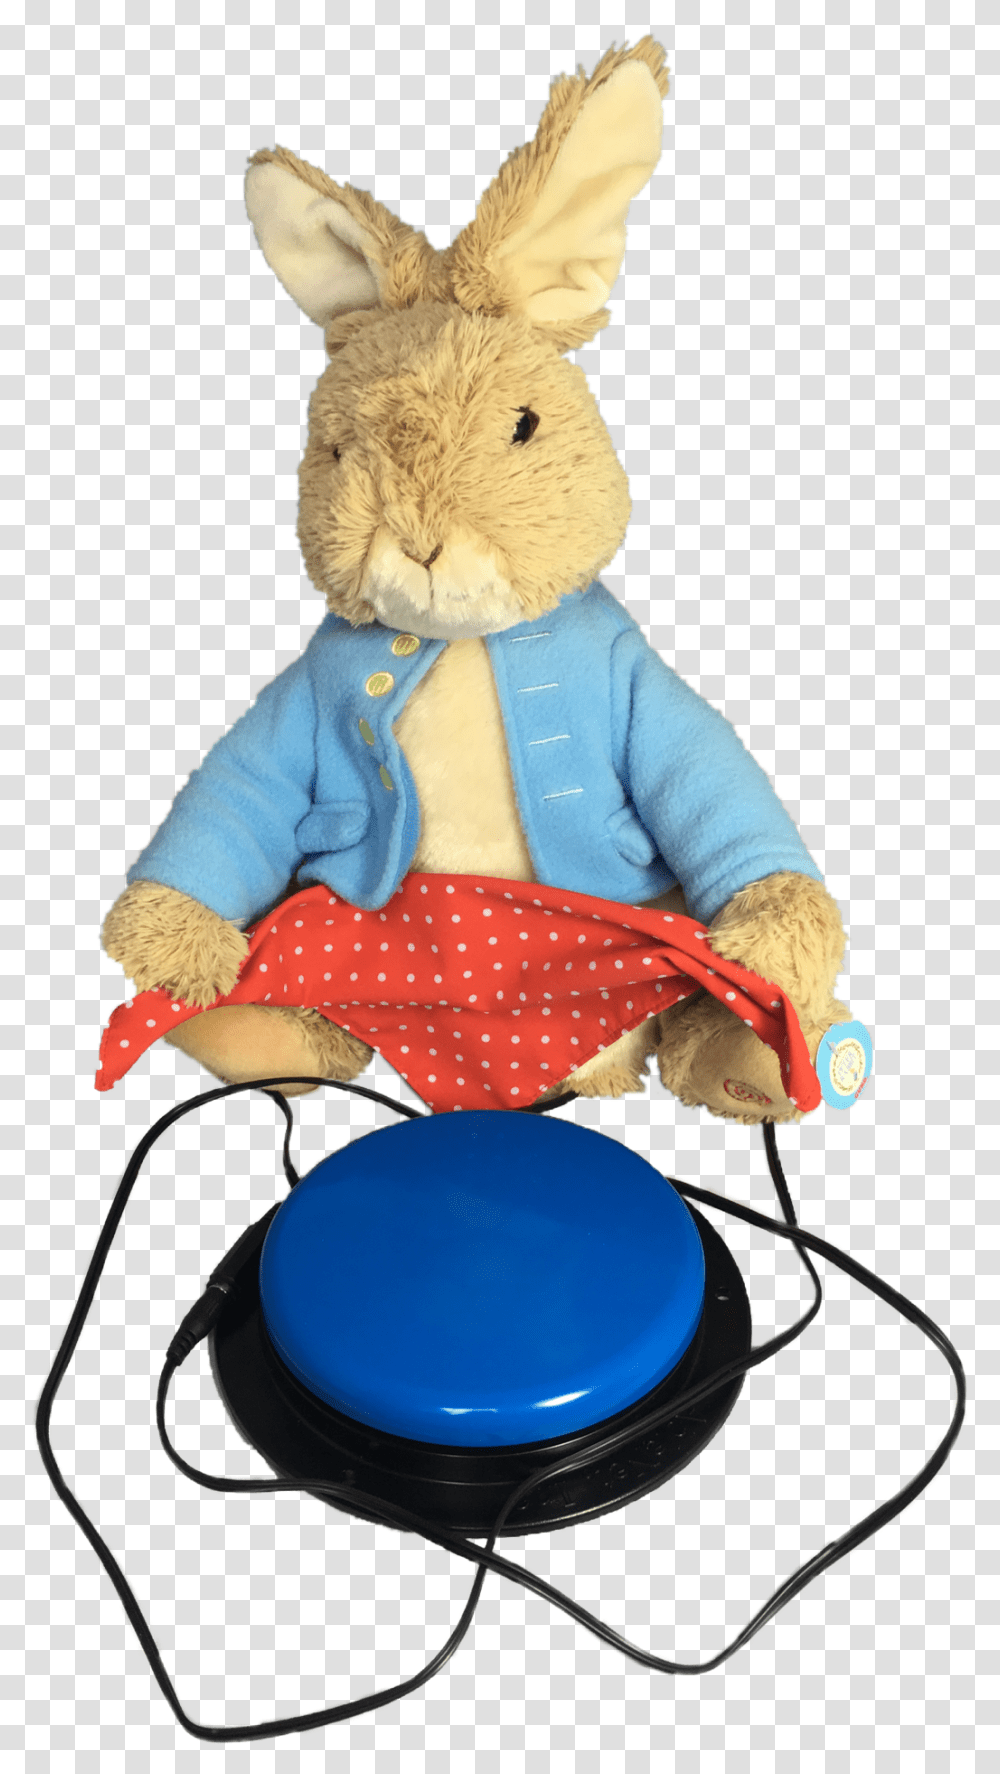 Peter Rabbit Plush Toy And Button Switch Sitting, Teddy Bear, Doll, Chair, Furniture Transparent Png